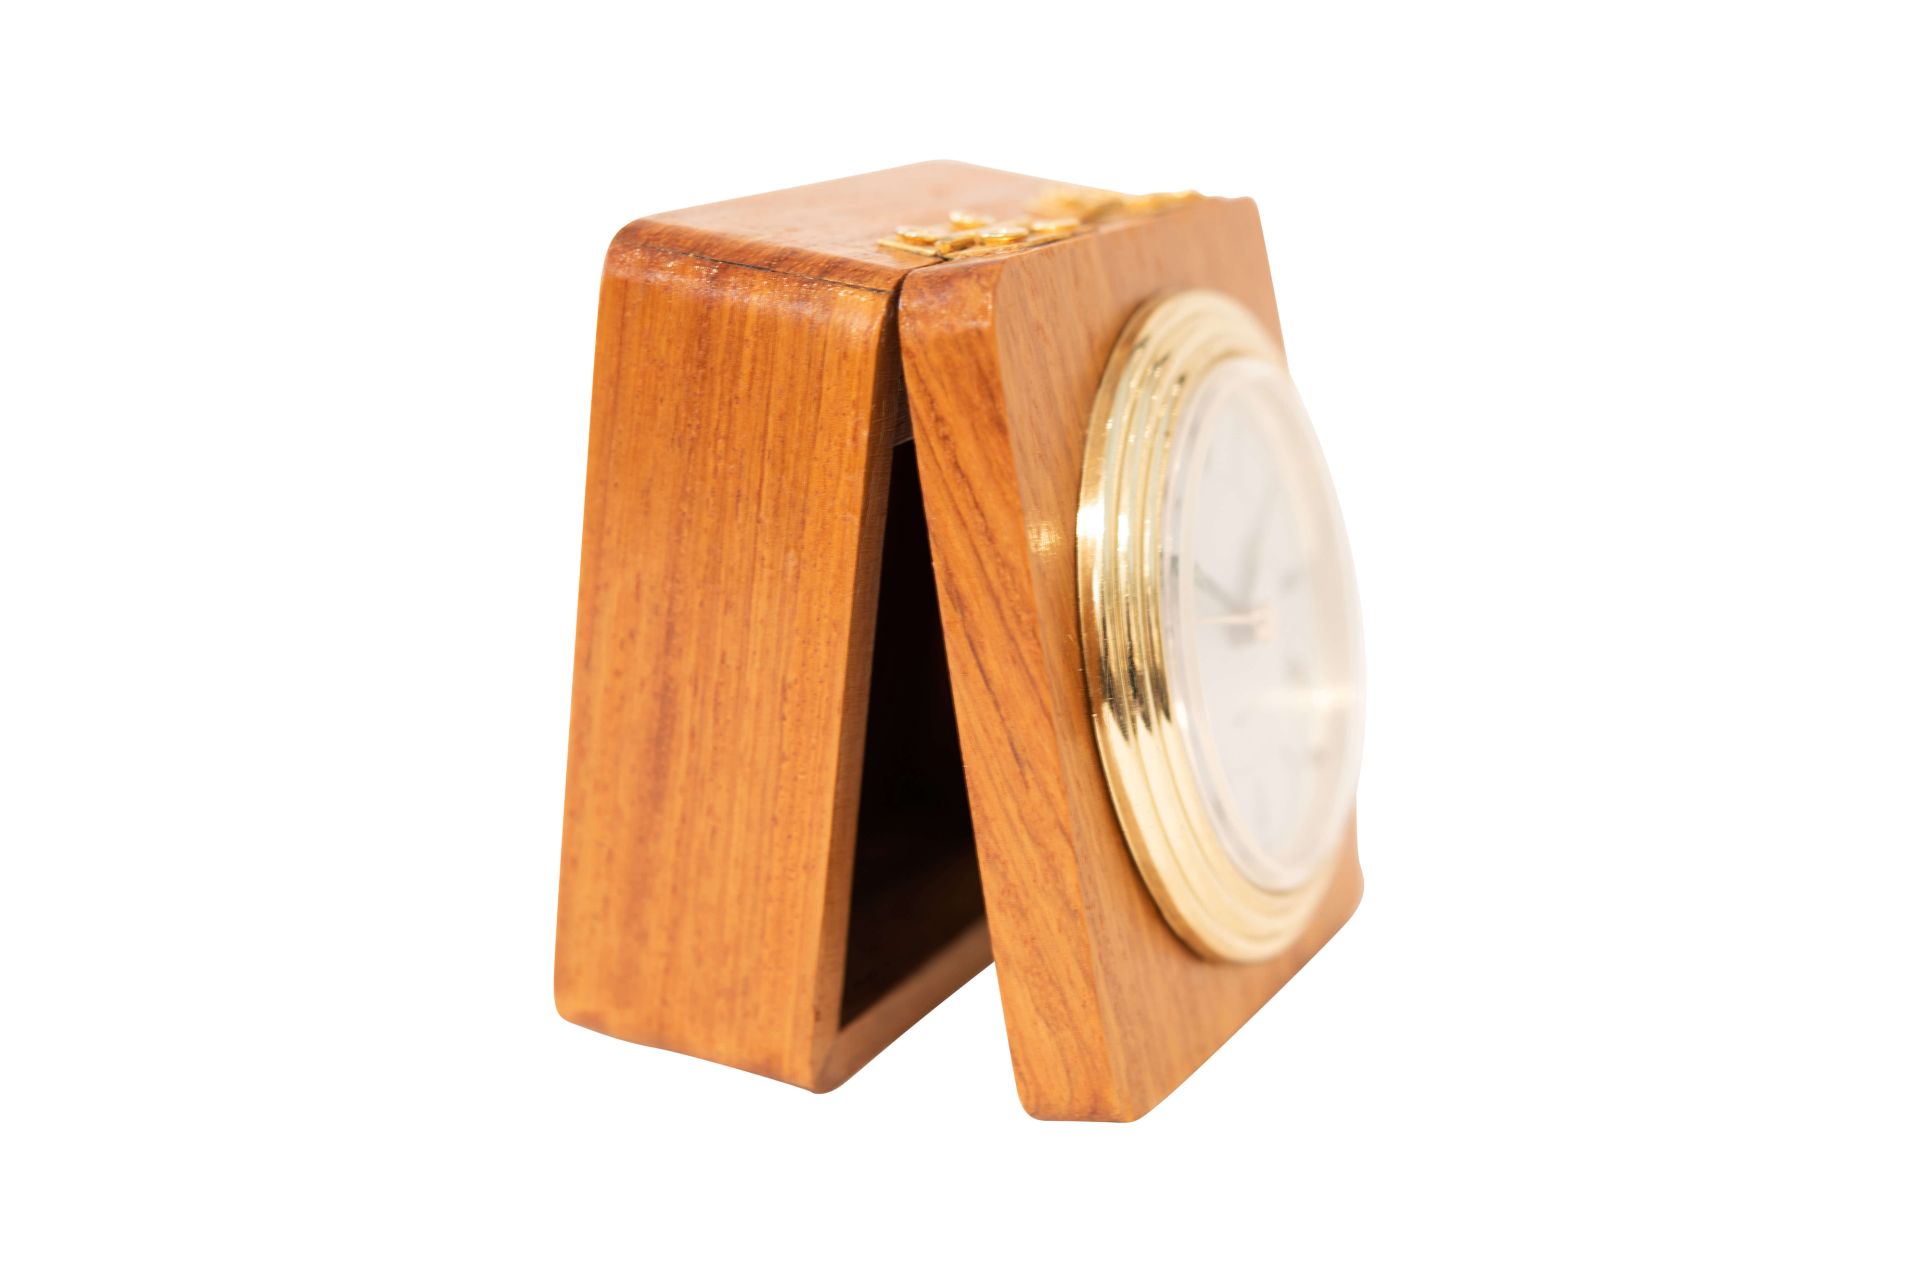 Quarz Uhr in Holz Schatulle ohne Batterie | Quartz Clock in Wooden Box, without Battery - Image 5 of 5